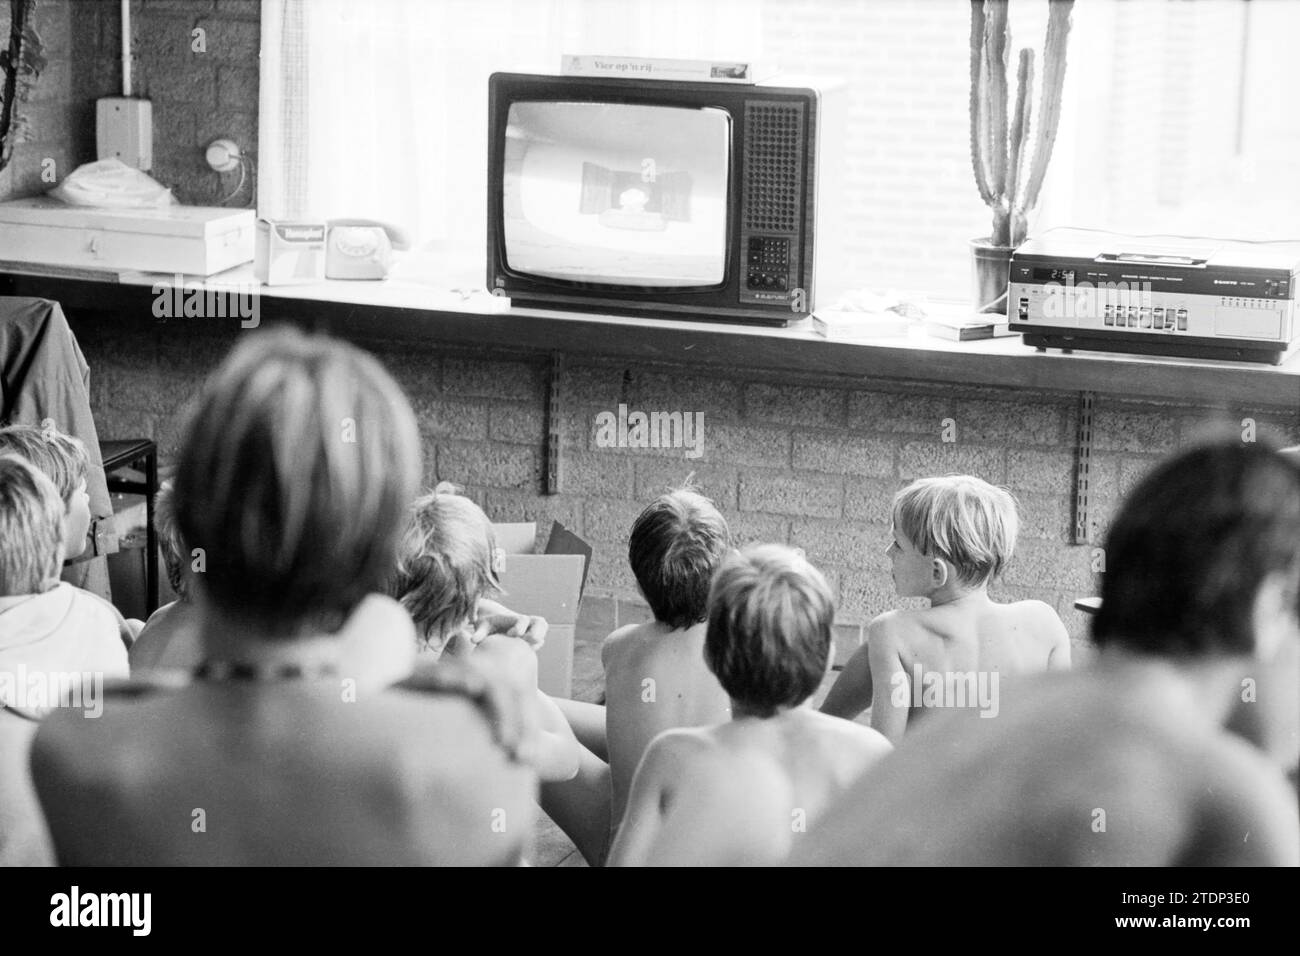 Children watch cartoons on television, 00-10-1983, Whizgle News from the Past, Tailored for the Future. Explore historical narratives, Dutch The Netherlands agency image with a modern perspective, bridging the gap between yesterday's events and tomorrow's insights. A timeless journey shaping the stories that shape our future Stock Photo